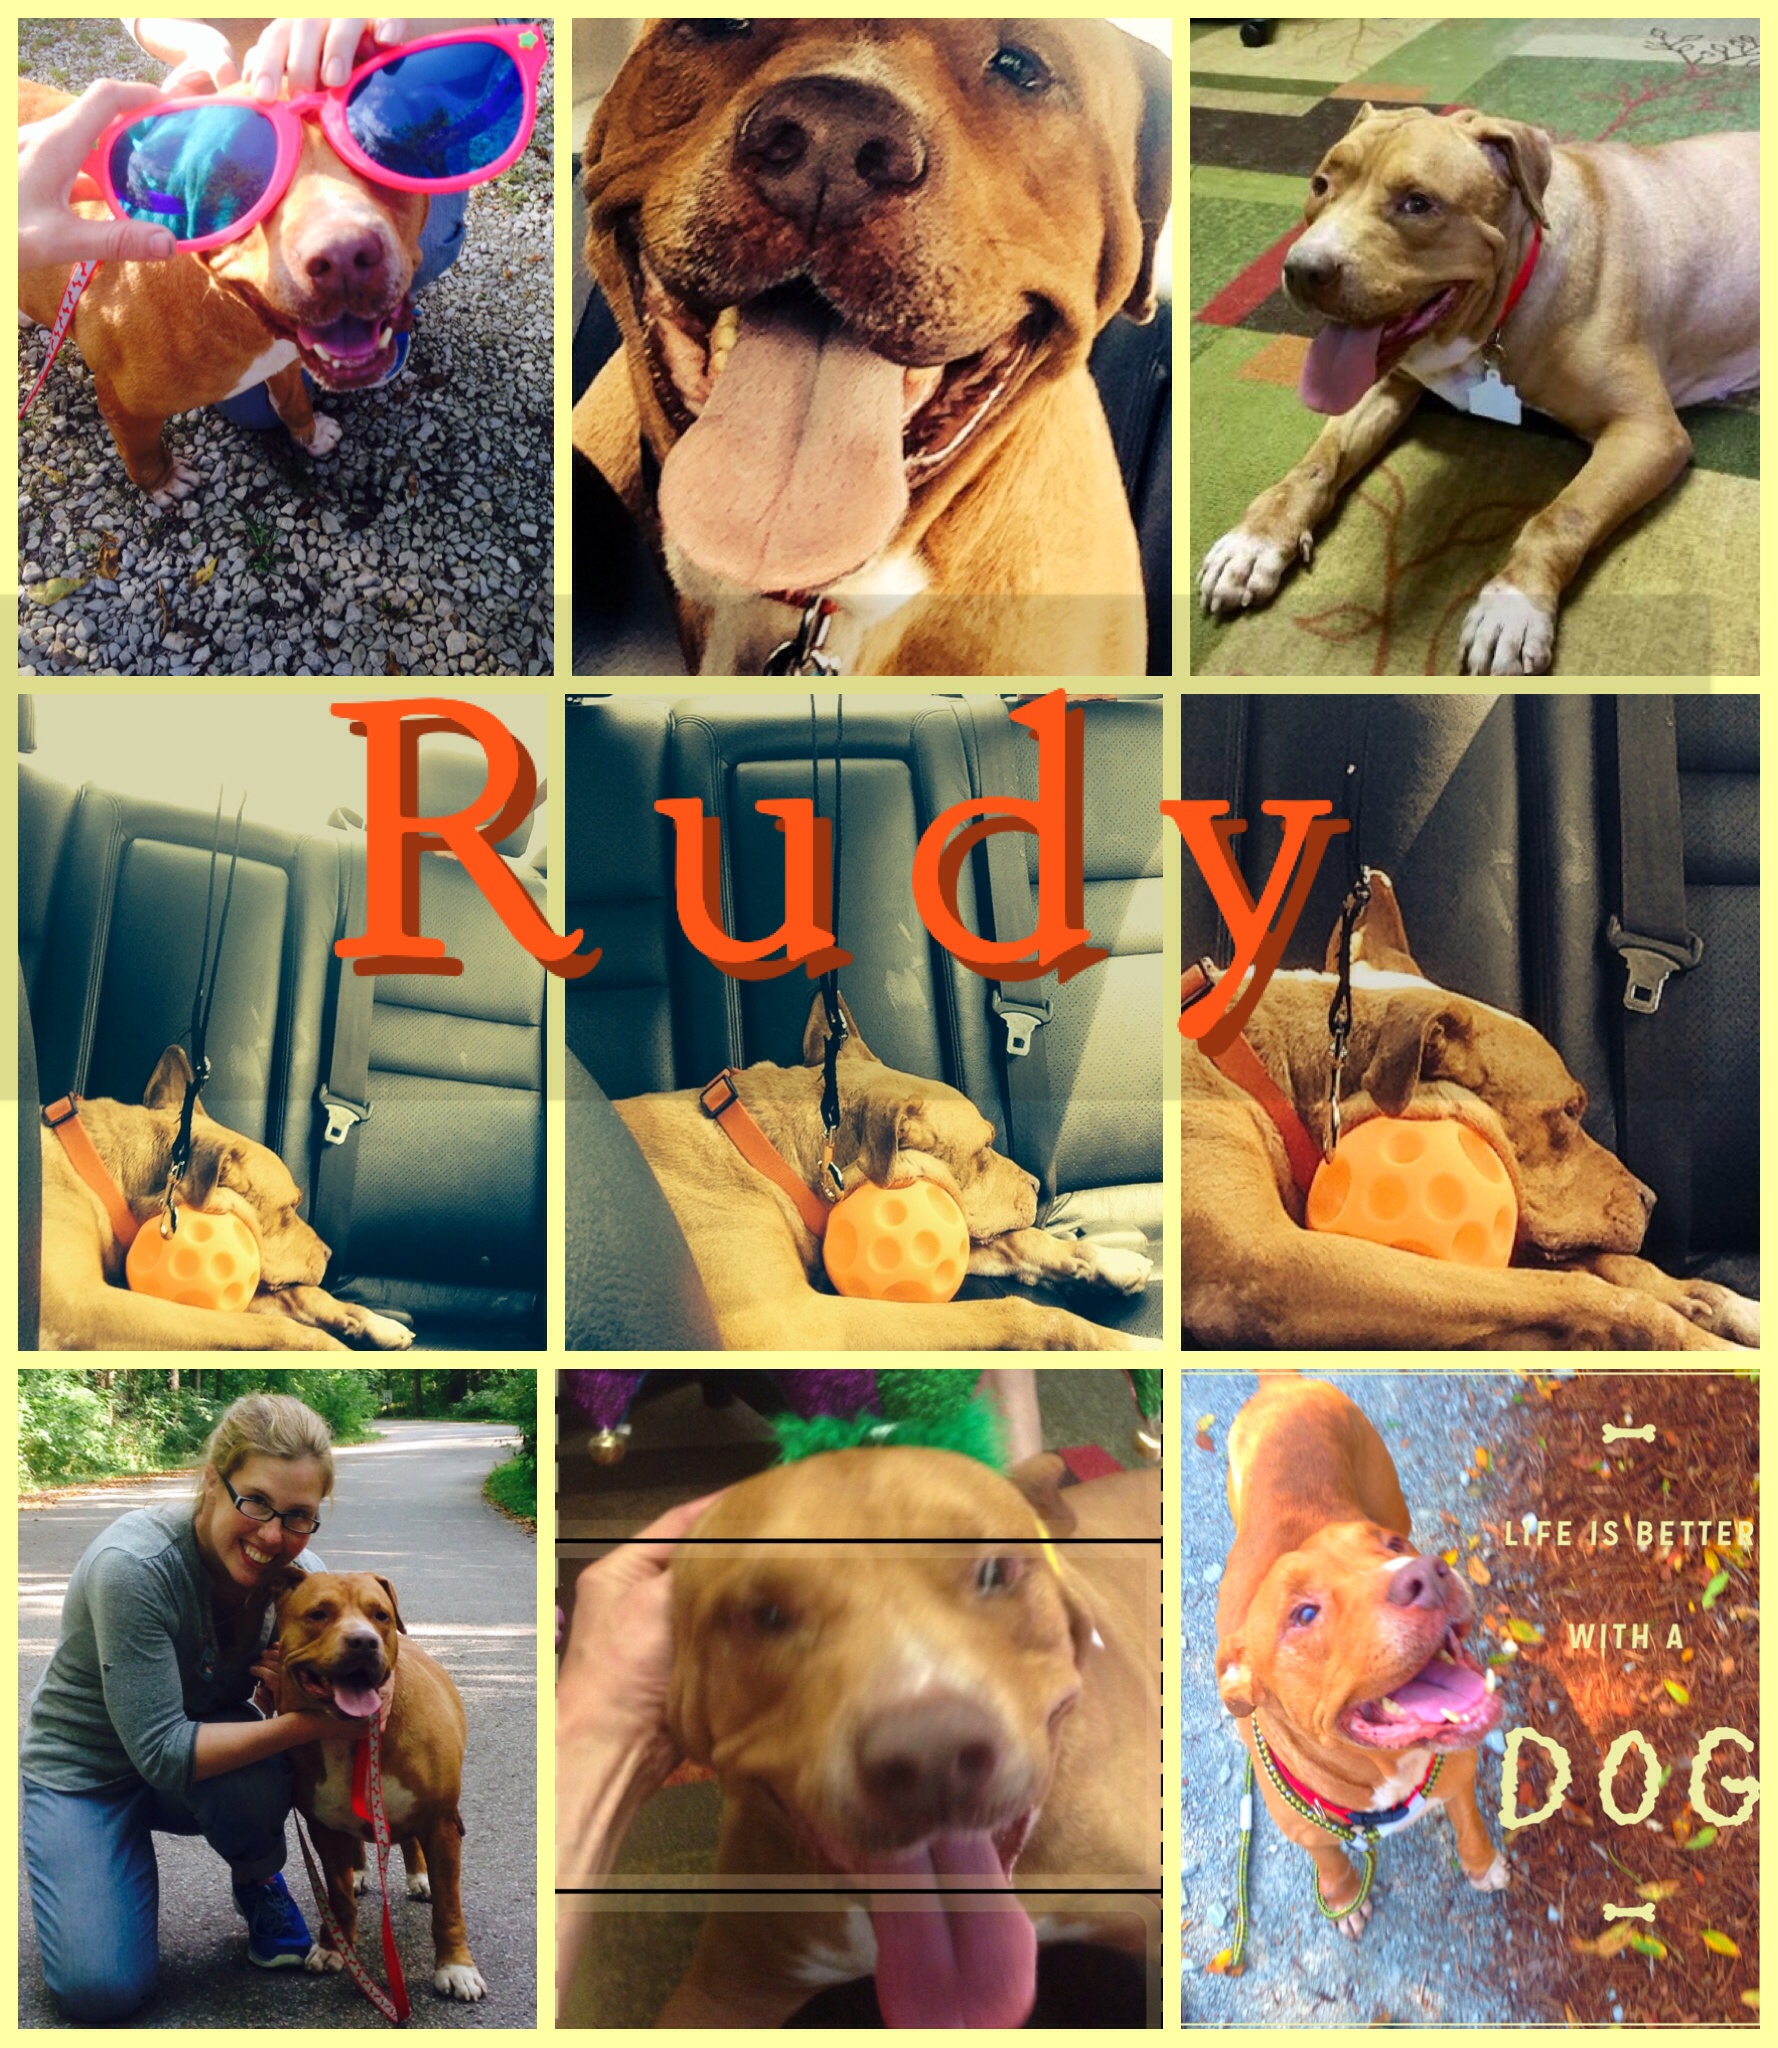 Rudy, a rescued dog, is still looking for a home.